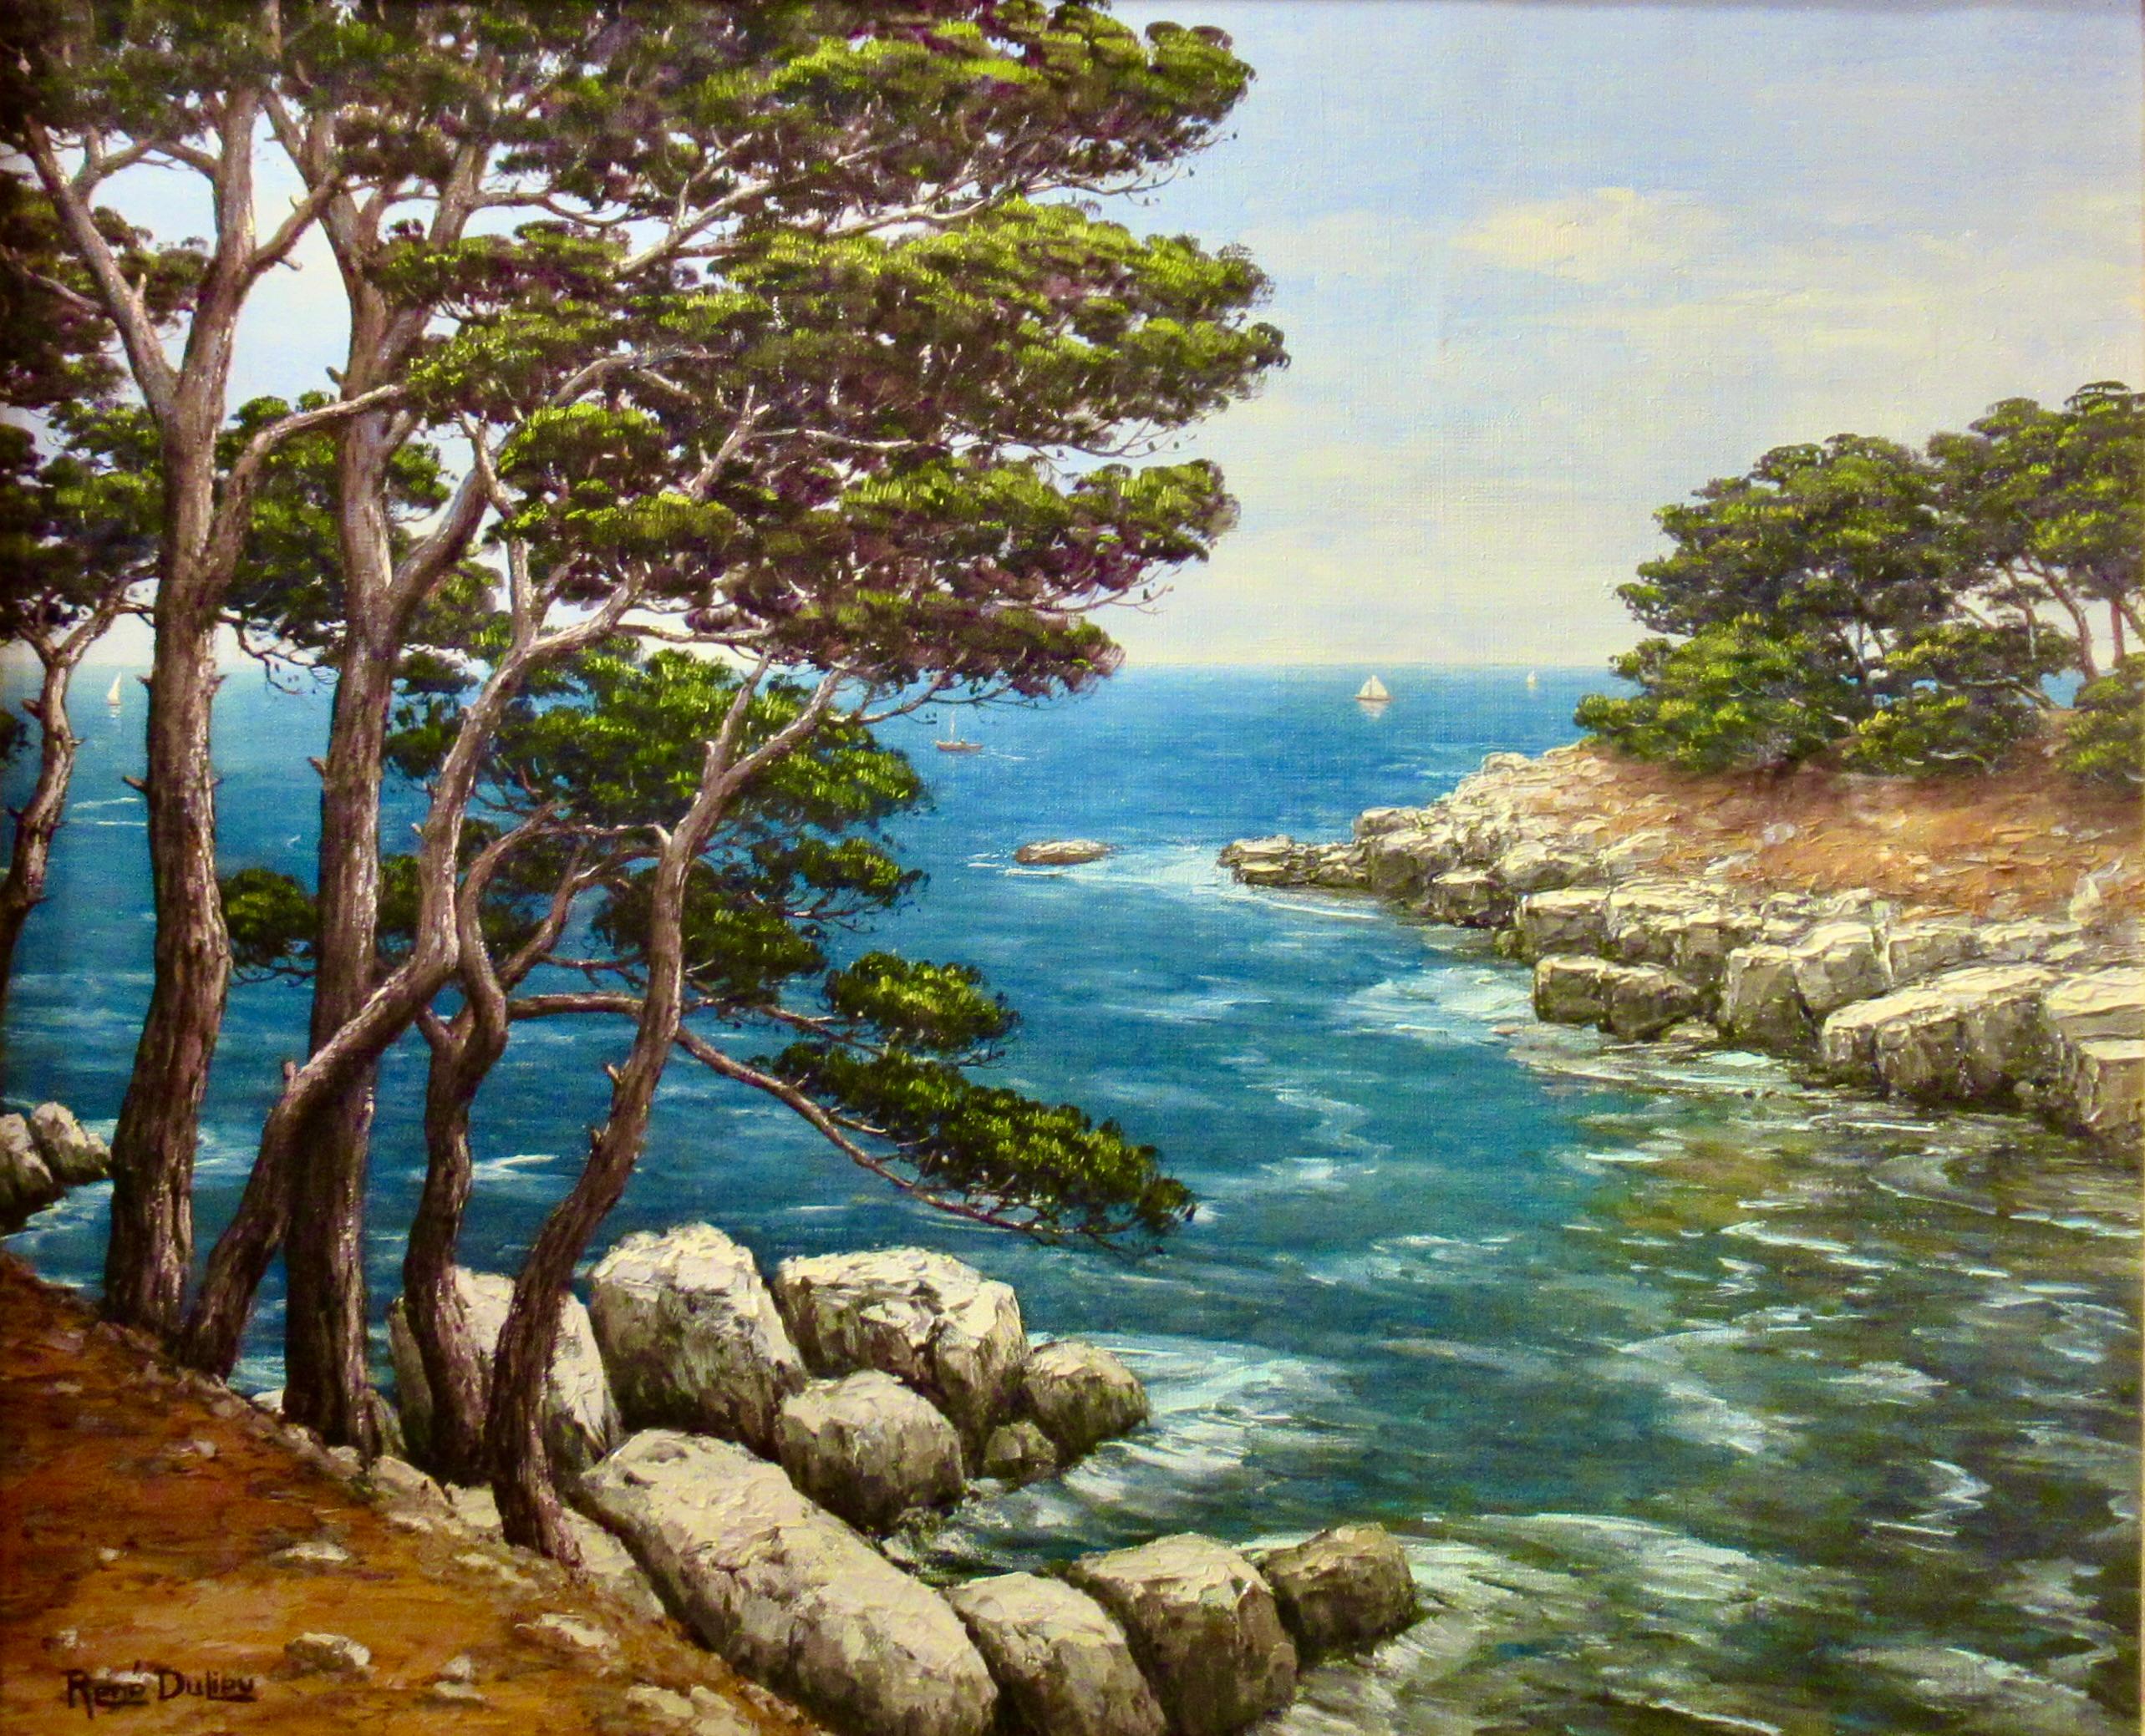 Coastal Scene of the French Riviera - Painting by Rene Dulieu